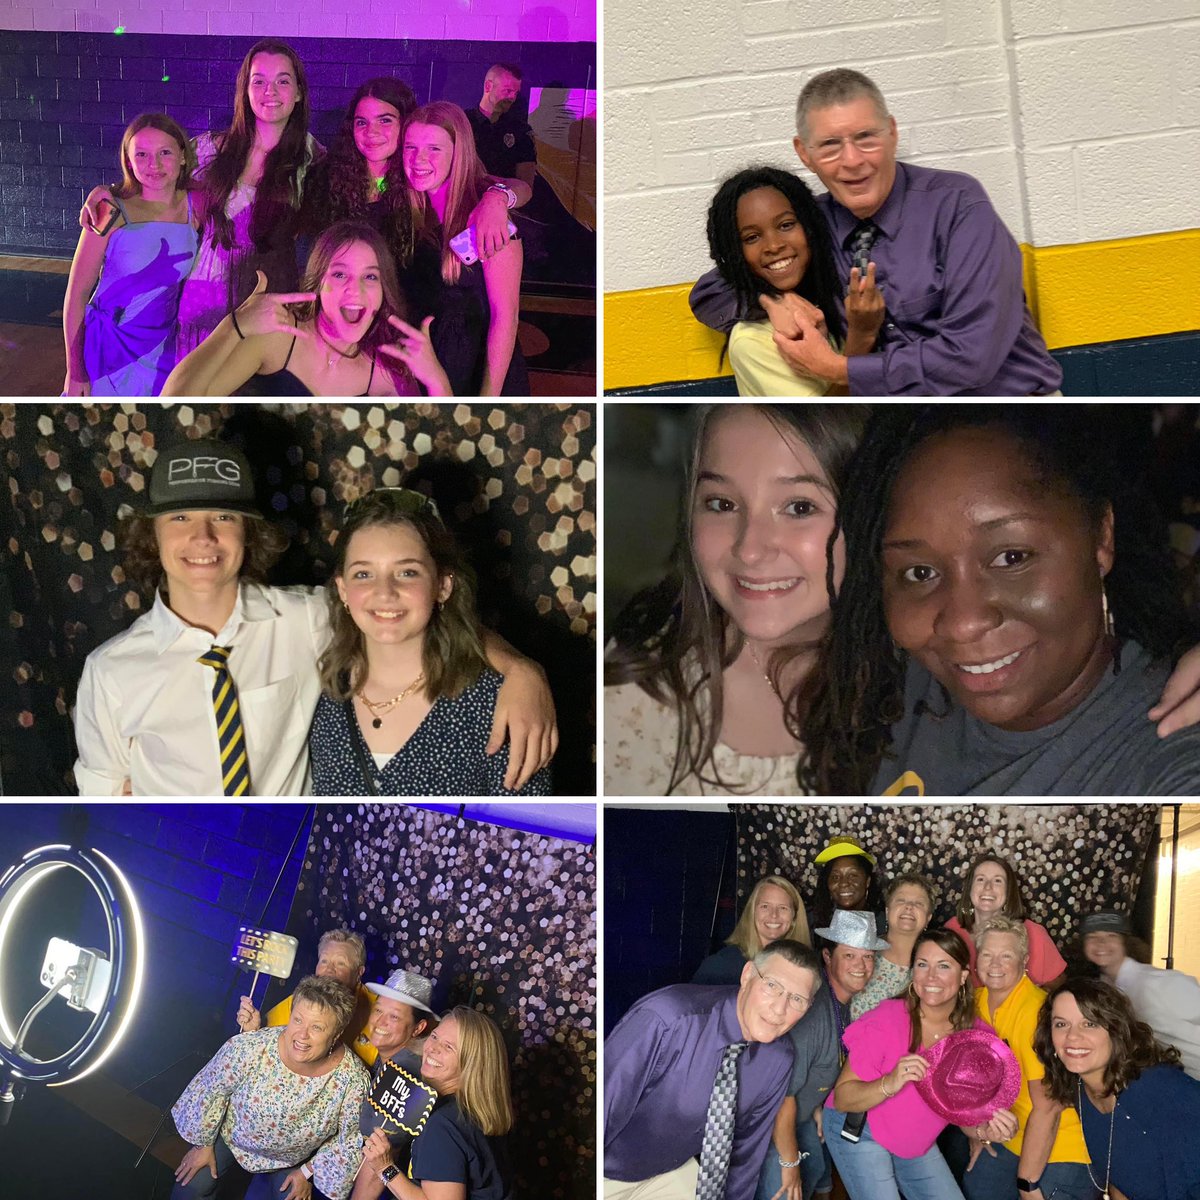 So much fun at the Tribe’s “Back to School” middle school dance for students AND staff💙💛
#onetribeonevibe